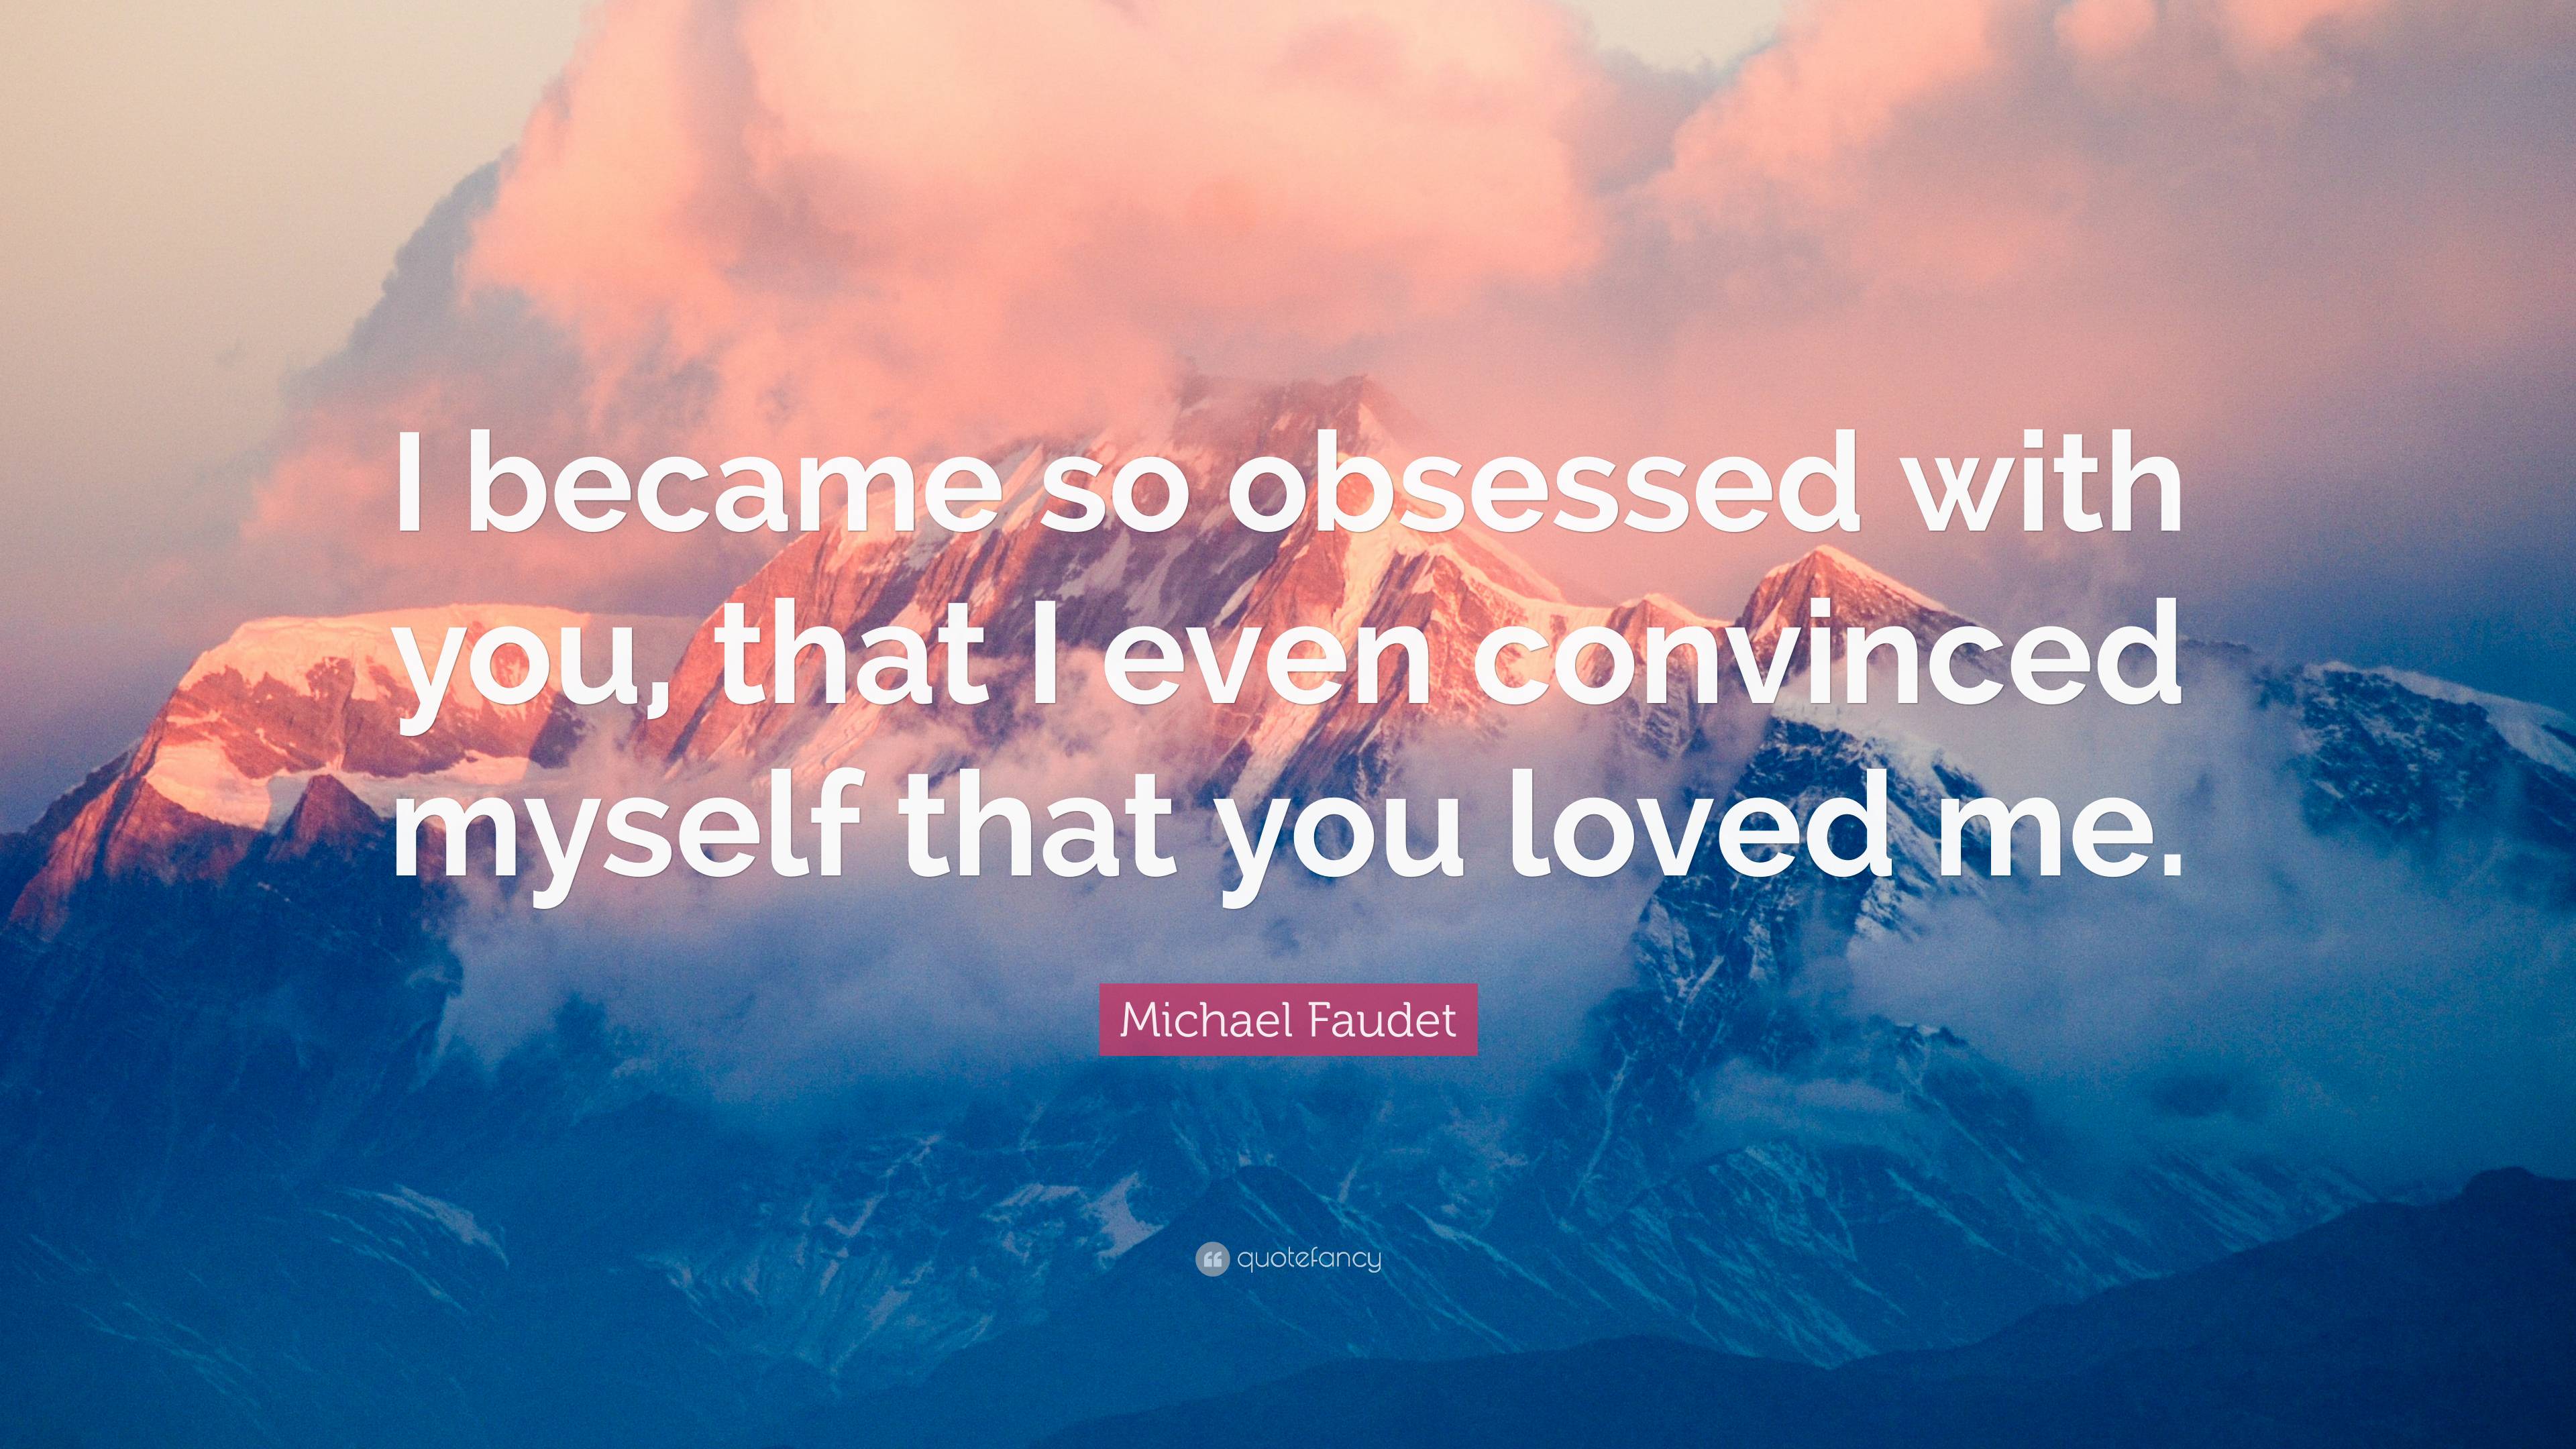 Michael Faudet Quote: “I became so obsessed with you, that I even convinced  myself that you